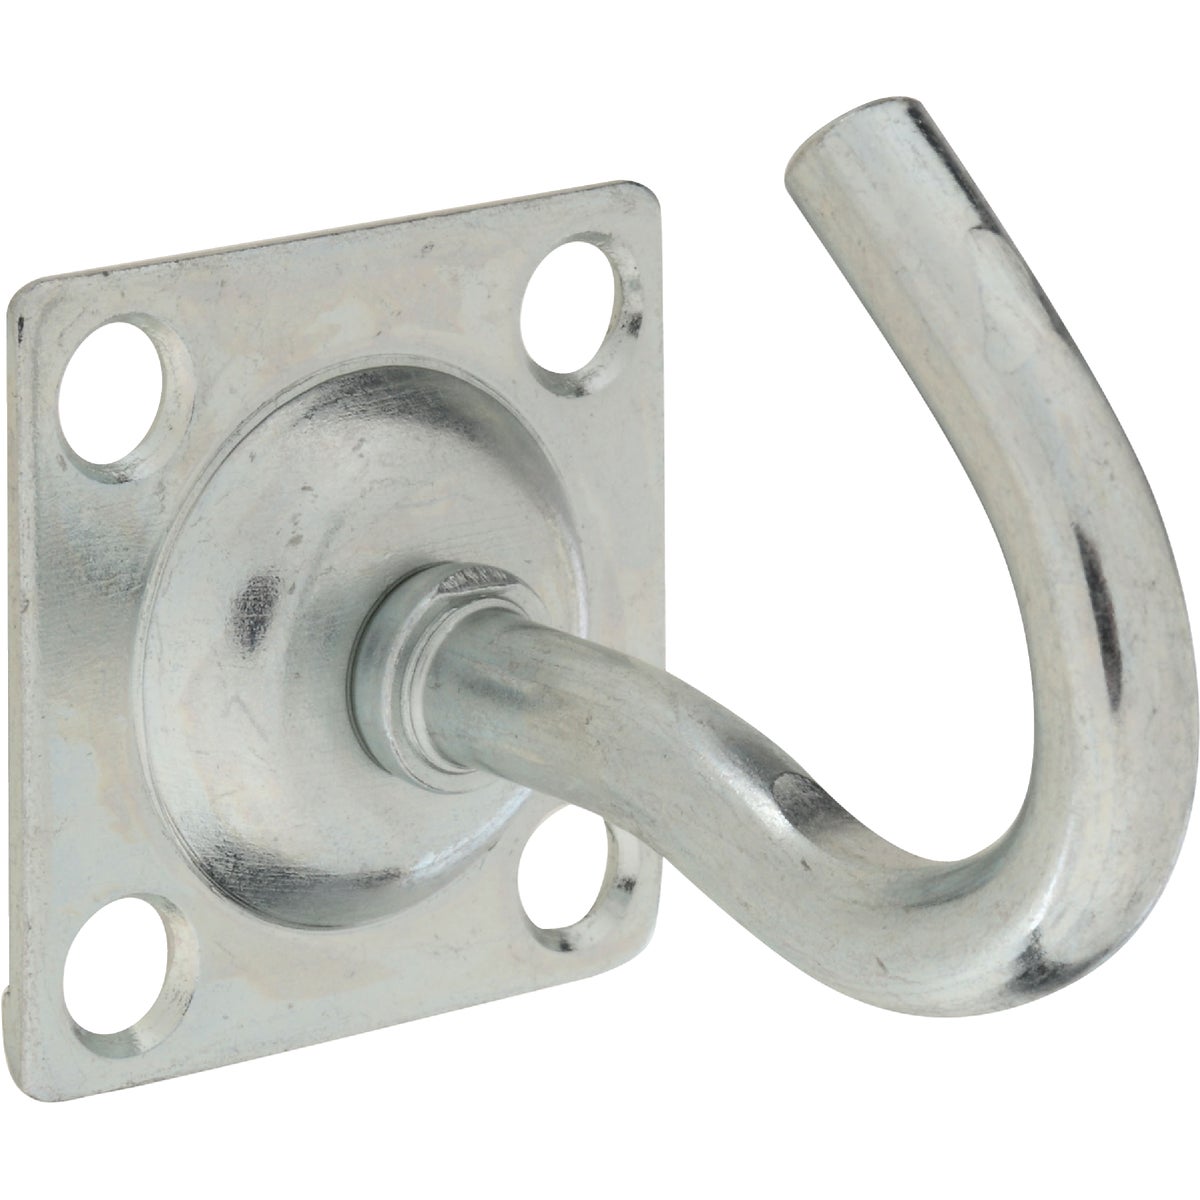 Item 200325, Plate style hook is designed for installing clotheslines, tie-downs for 